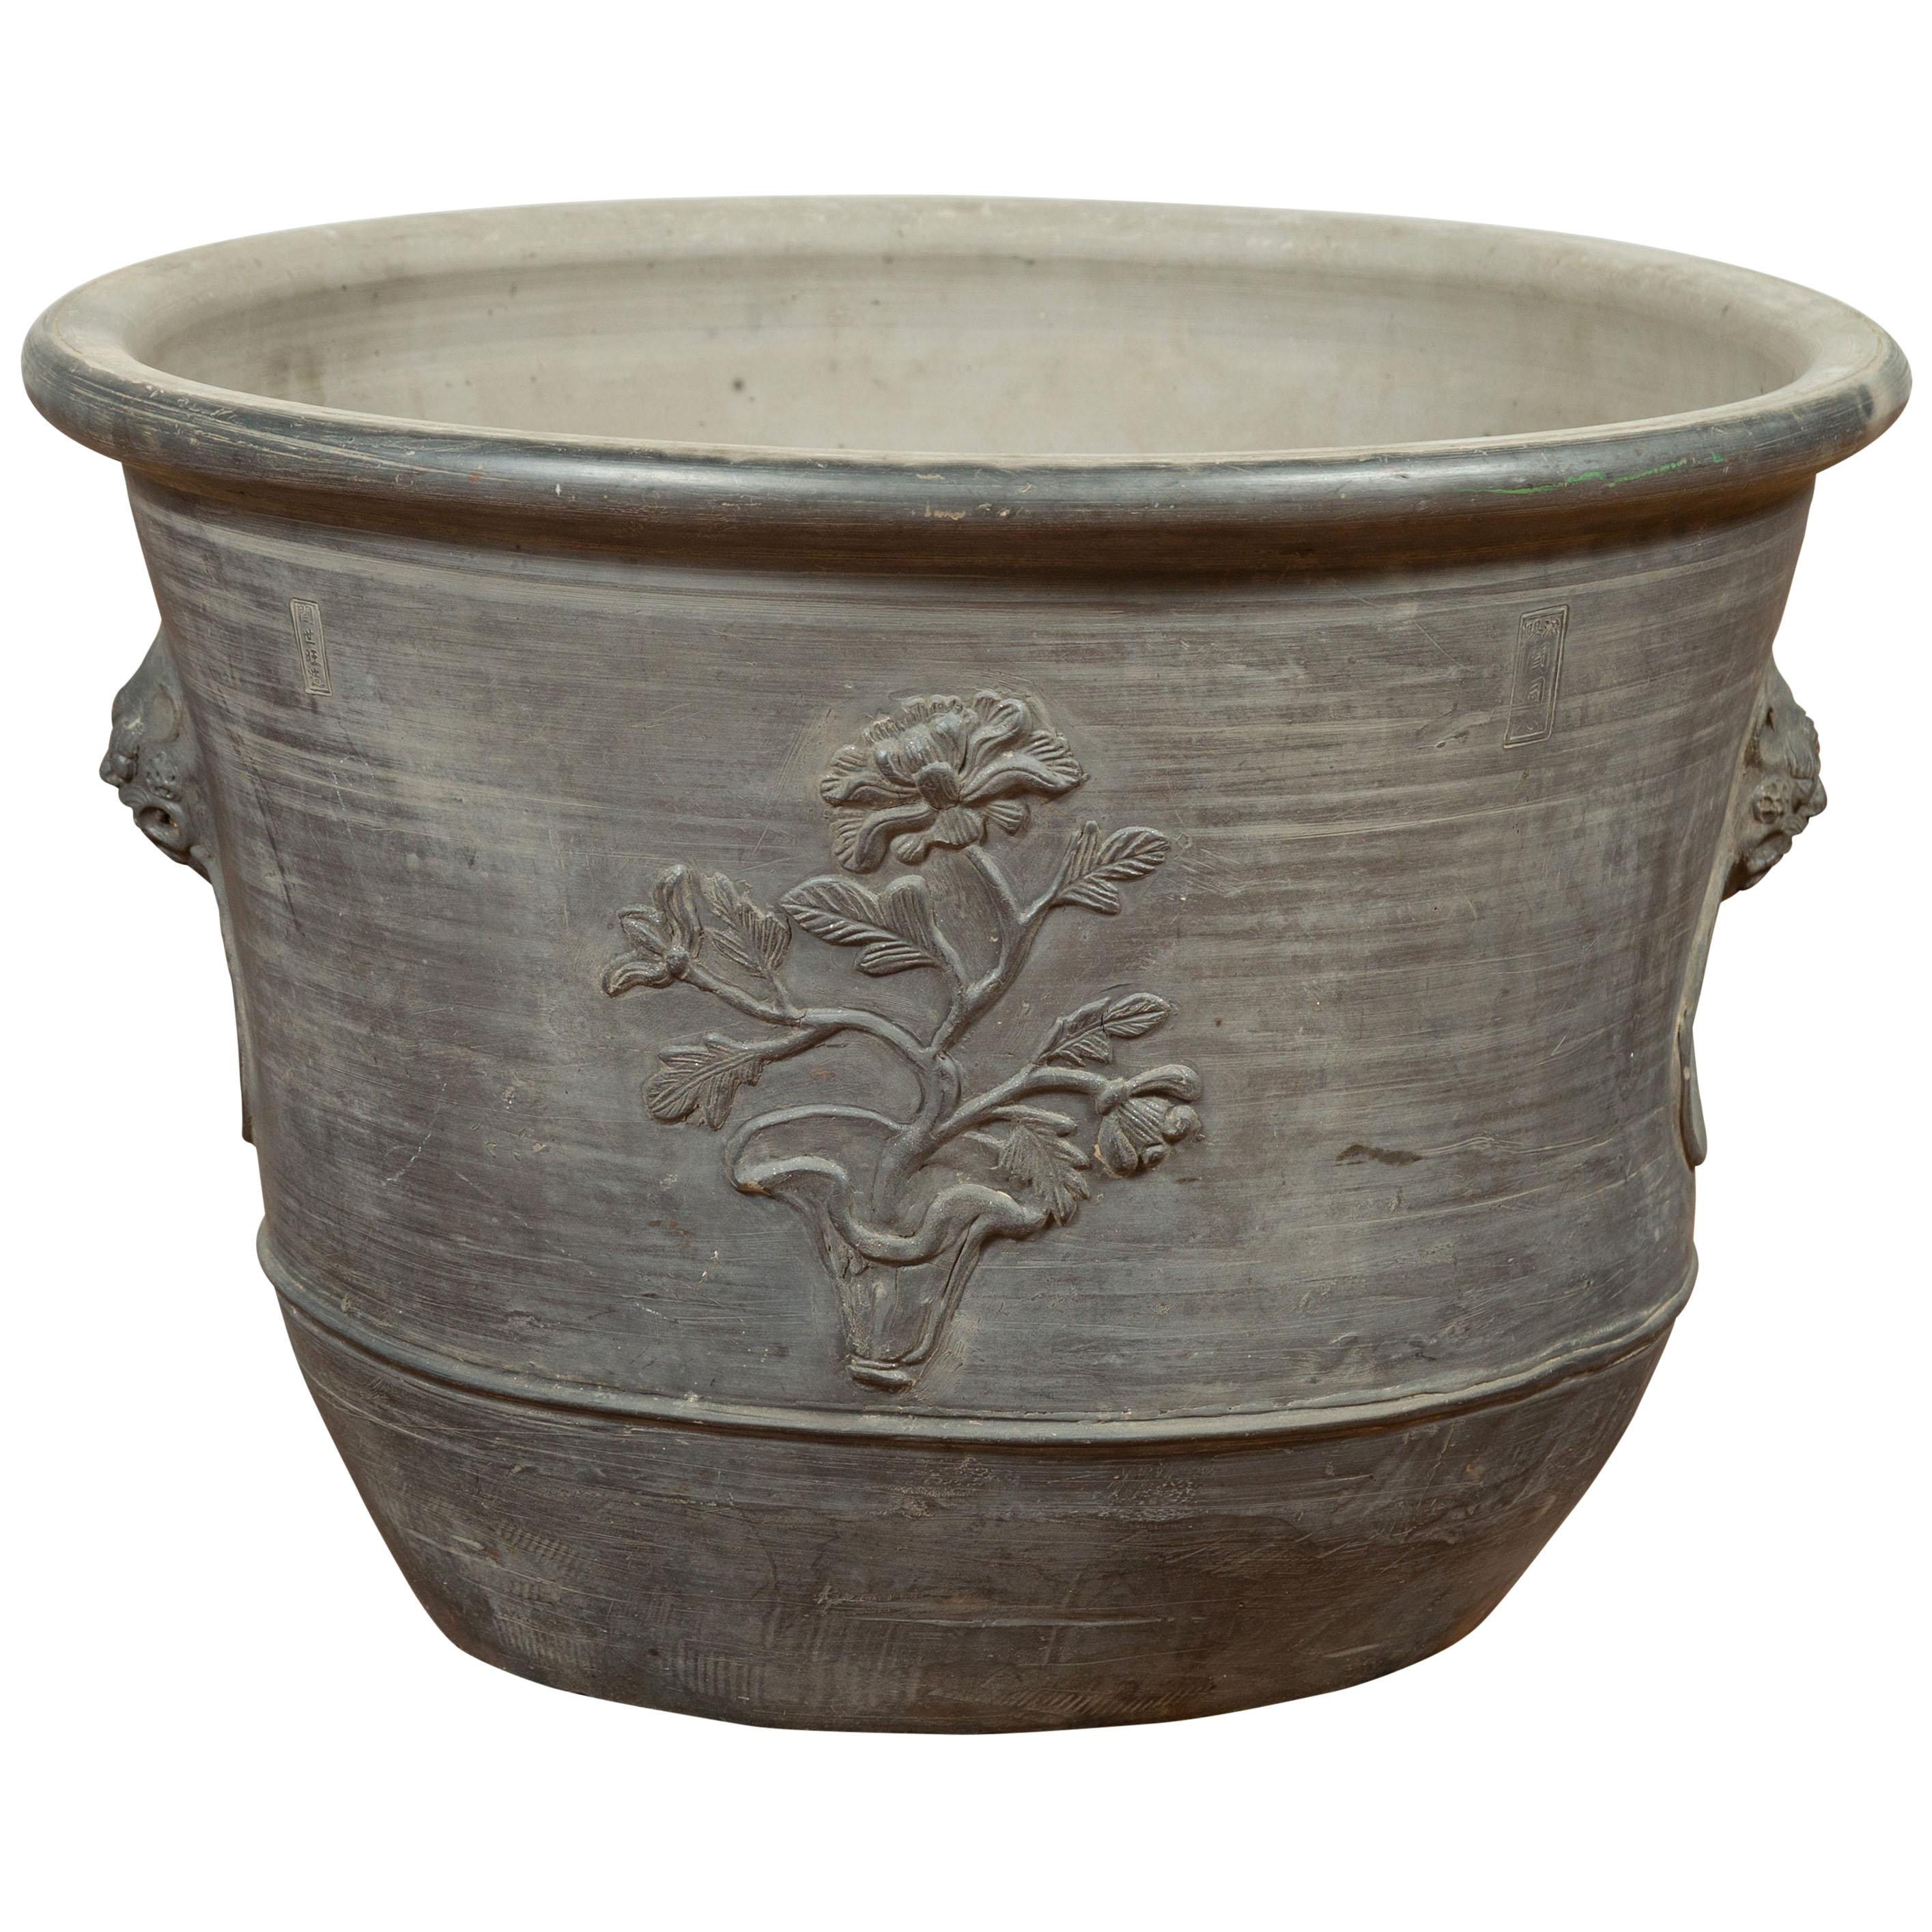 Large Chinese Ceramic Planter with Floral Motifs and Lateral Handles